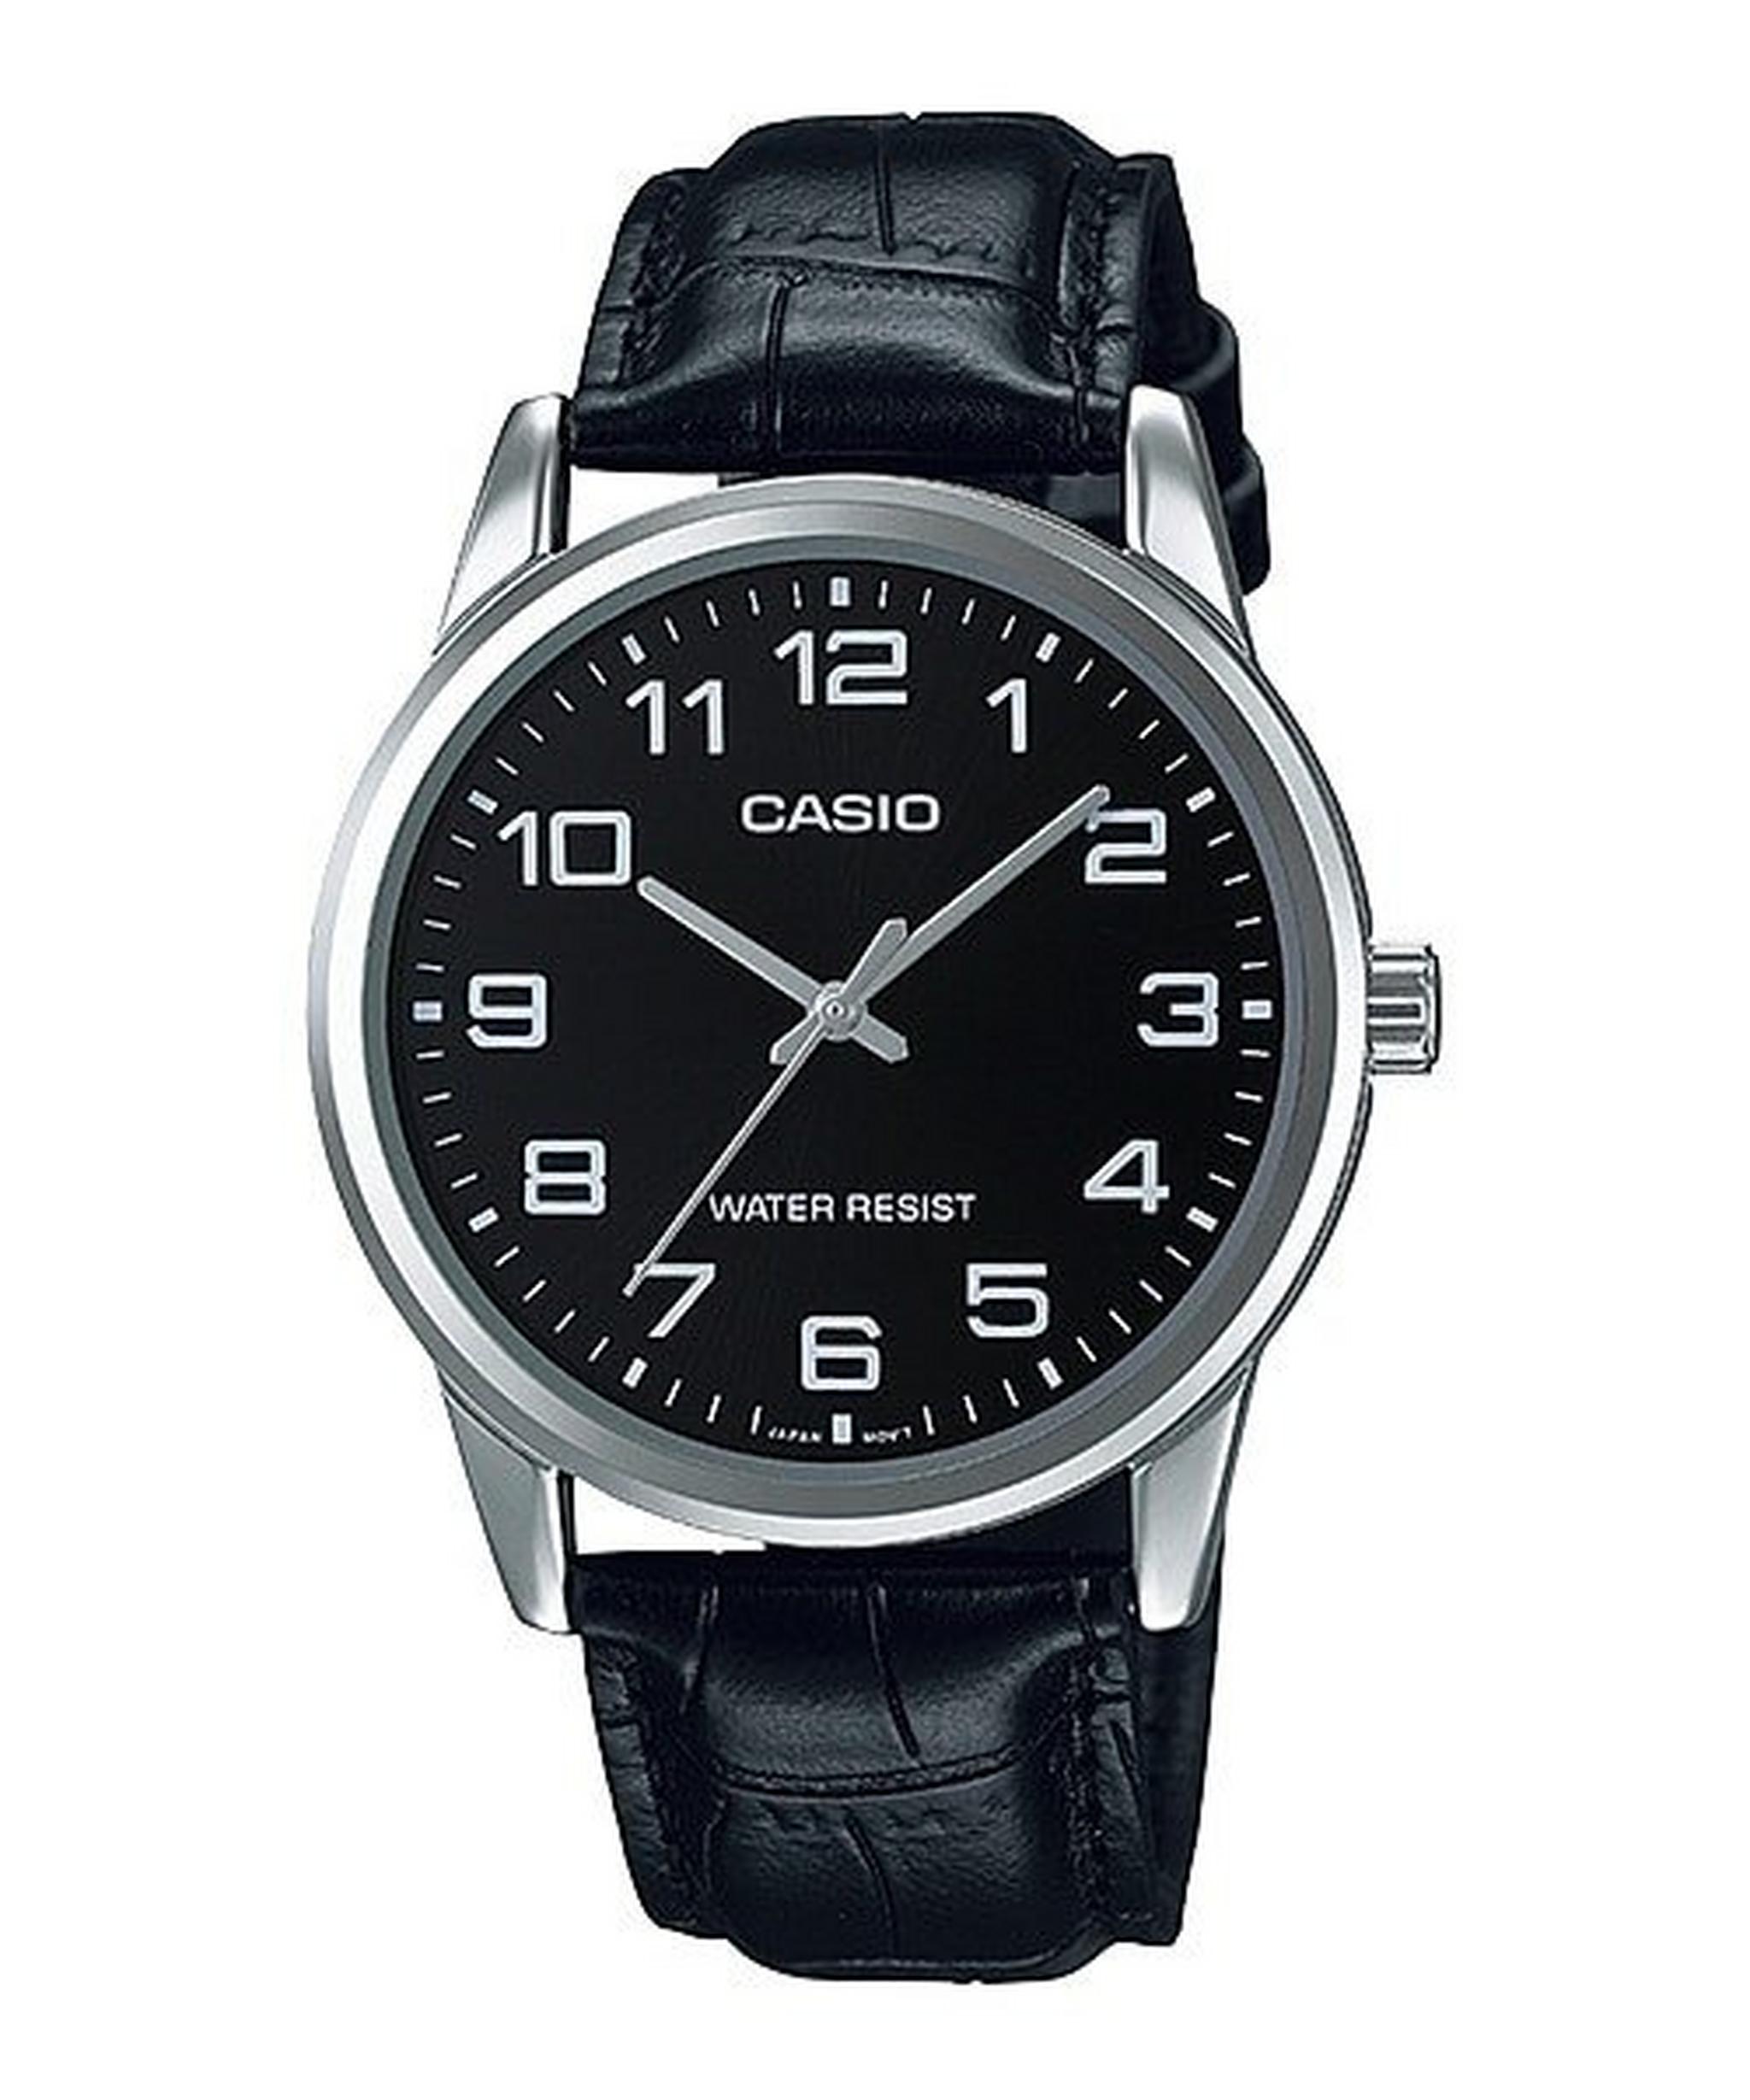 Casio 45mm Gent's Leather Analog Casual Watch - (MTP-V001L-1BUDF)